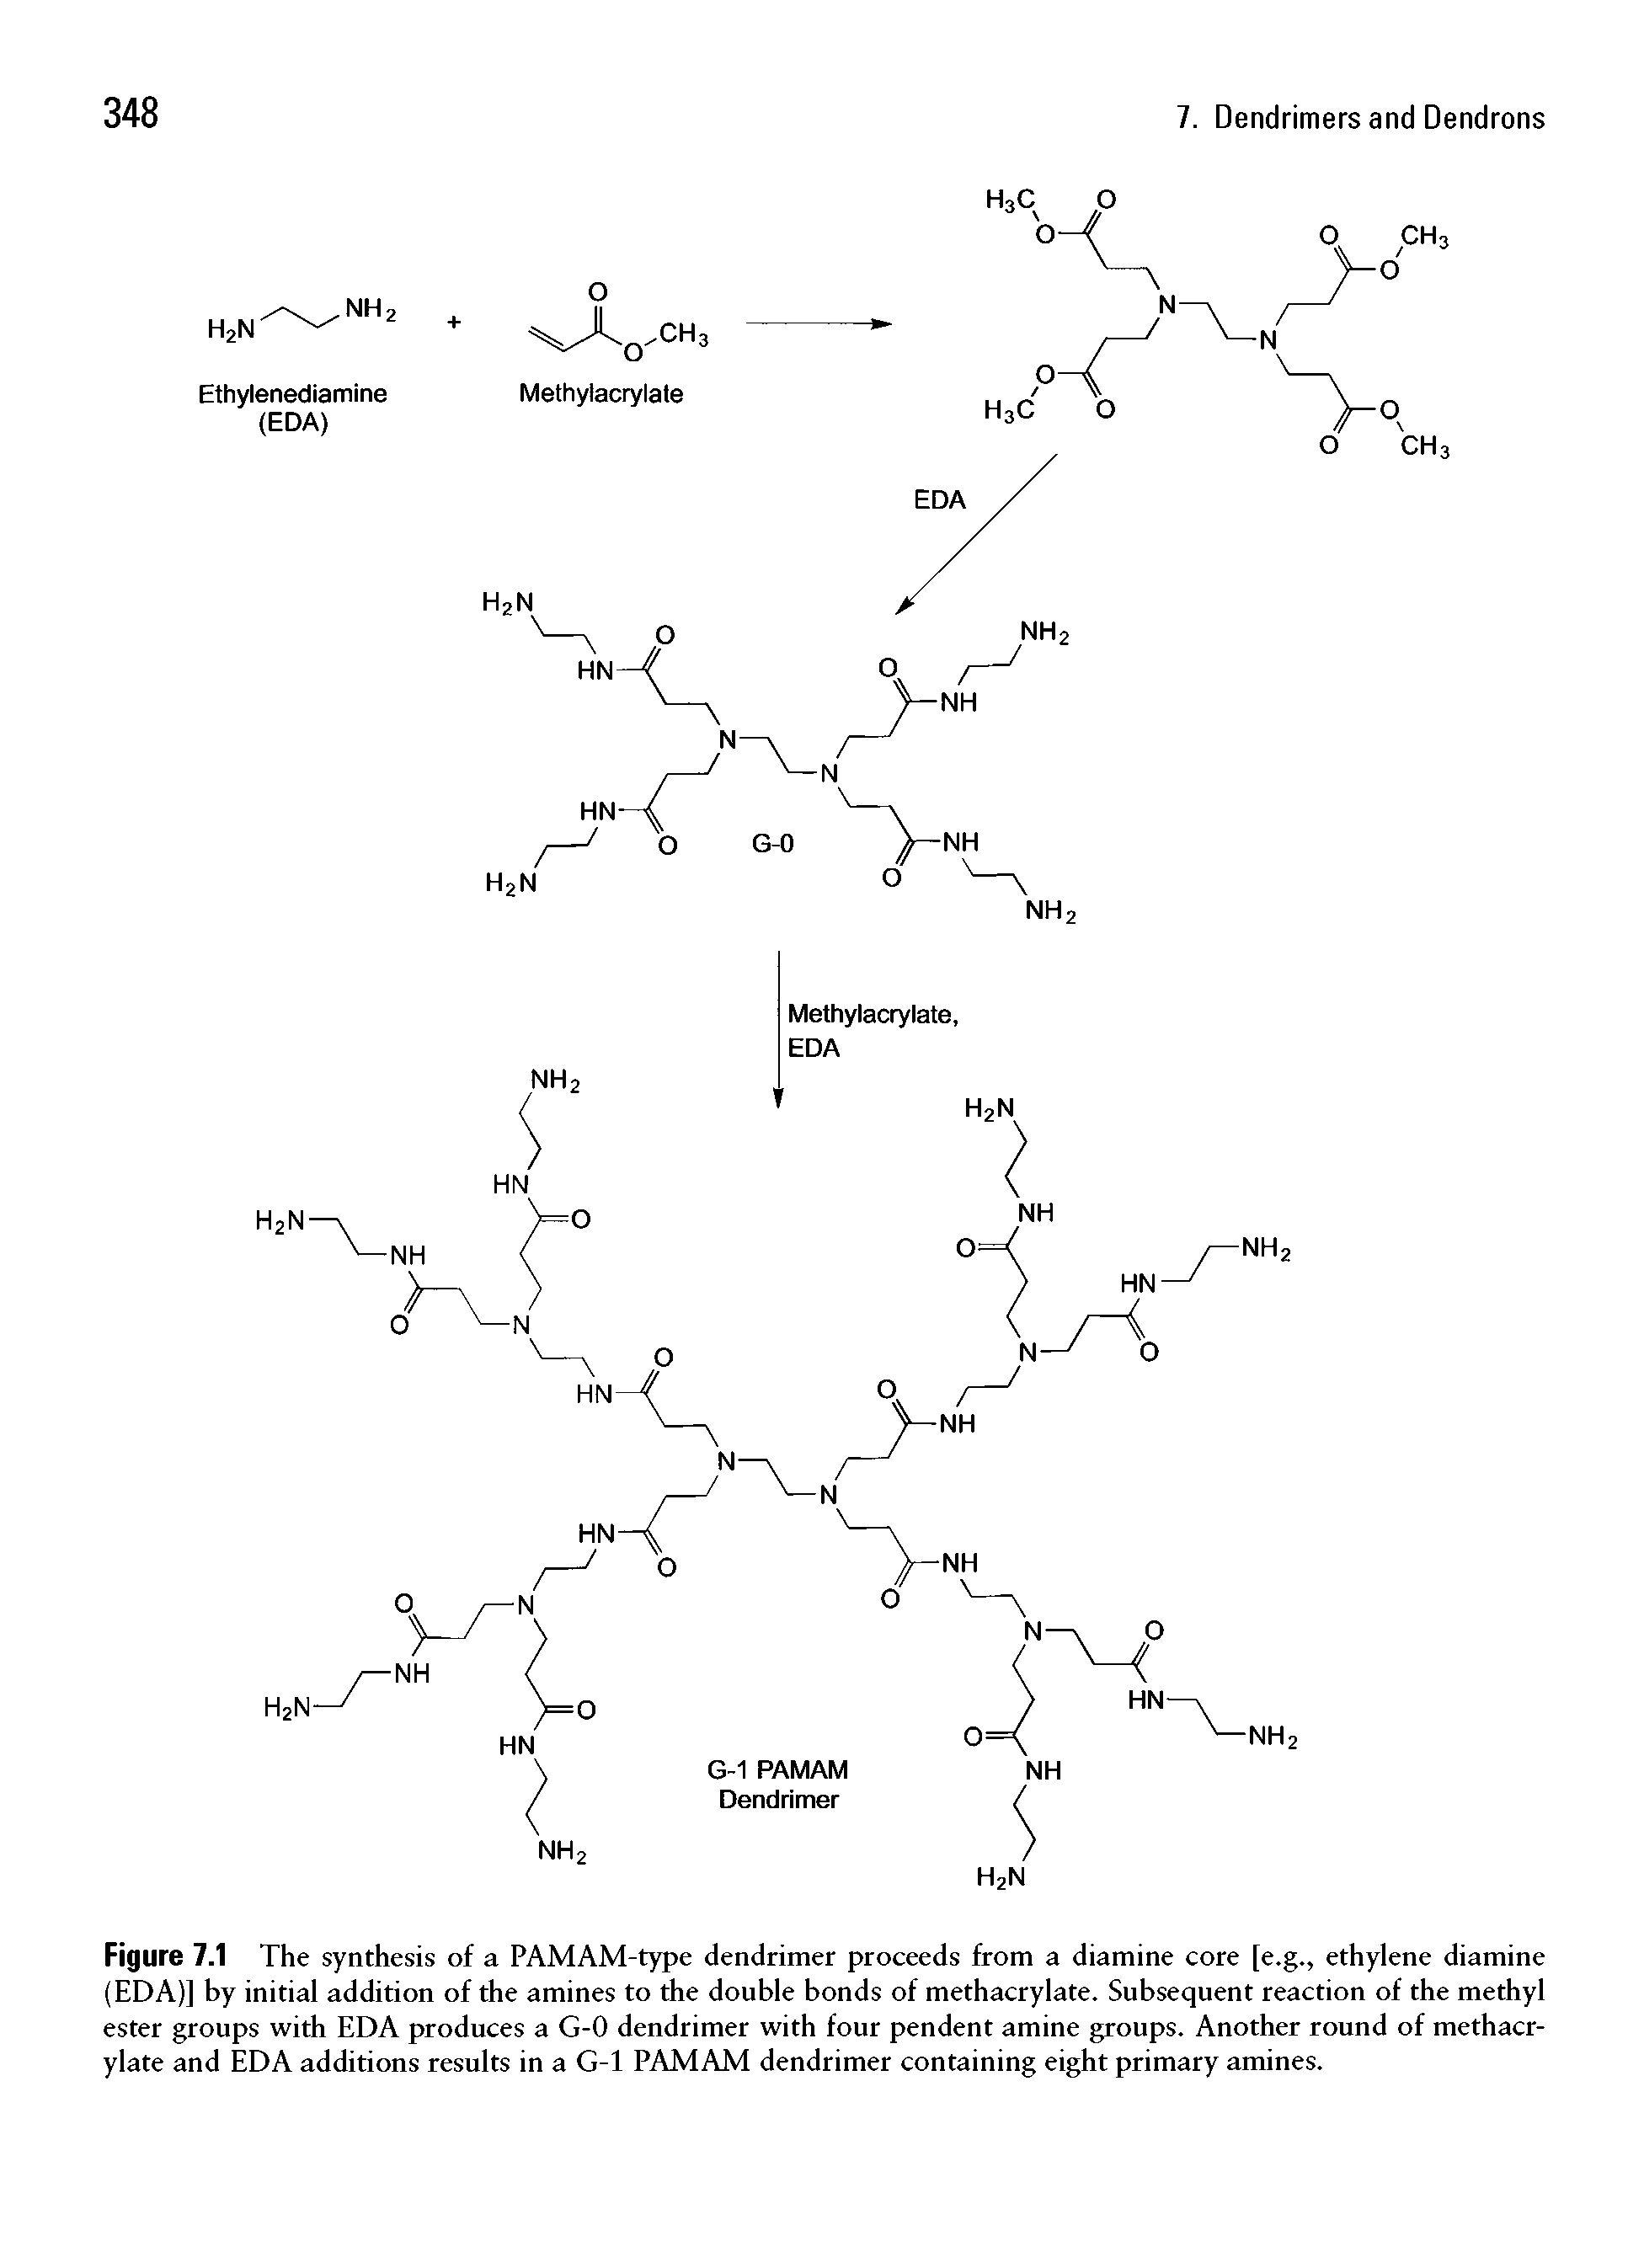 Figure 7.1 The synthesis of a PAMAM-type dendrimer proceeds from a diamine core [e.g., ethylene diamine (EDA)] by initial addition of the amines to the double bonds of methacrylate. Subsequent reaction of the methyl ester groups with EDA produces a G-0 dendrimer with four pendent amine groups. Another round of methacrylate and EDA additions results in a G-l PAMAM dendrimer containing eight primary amines.